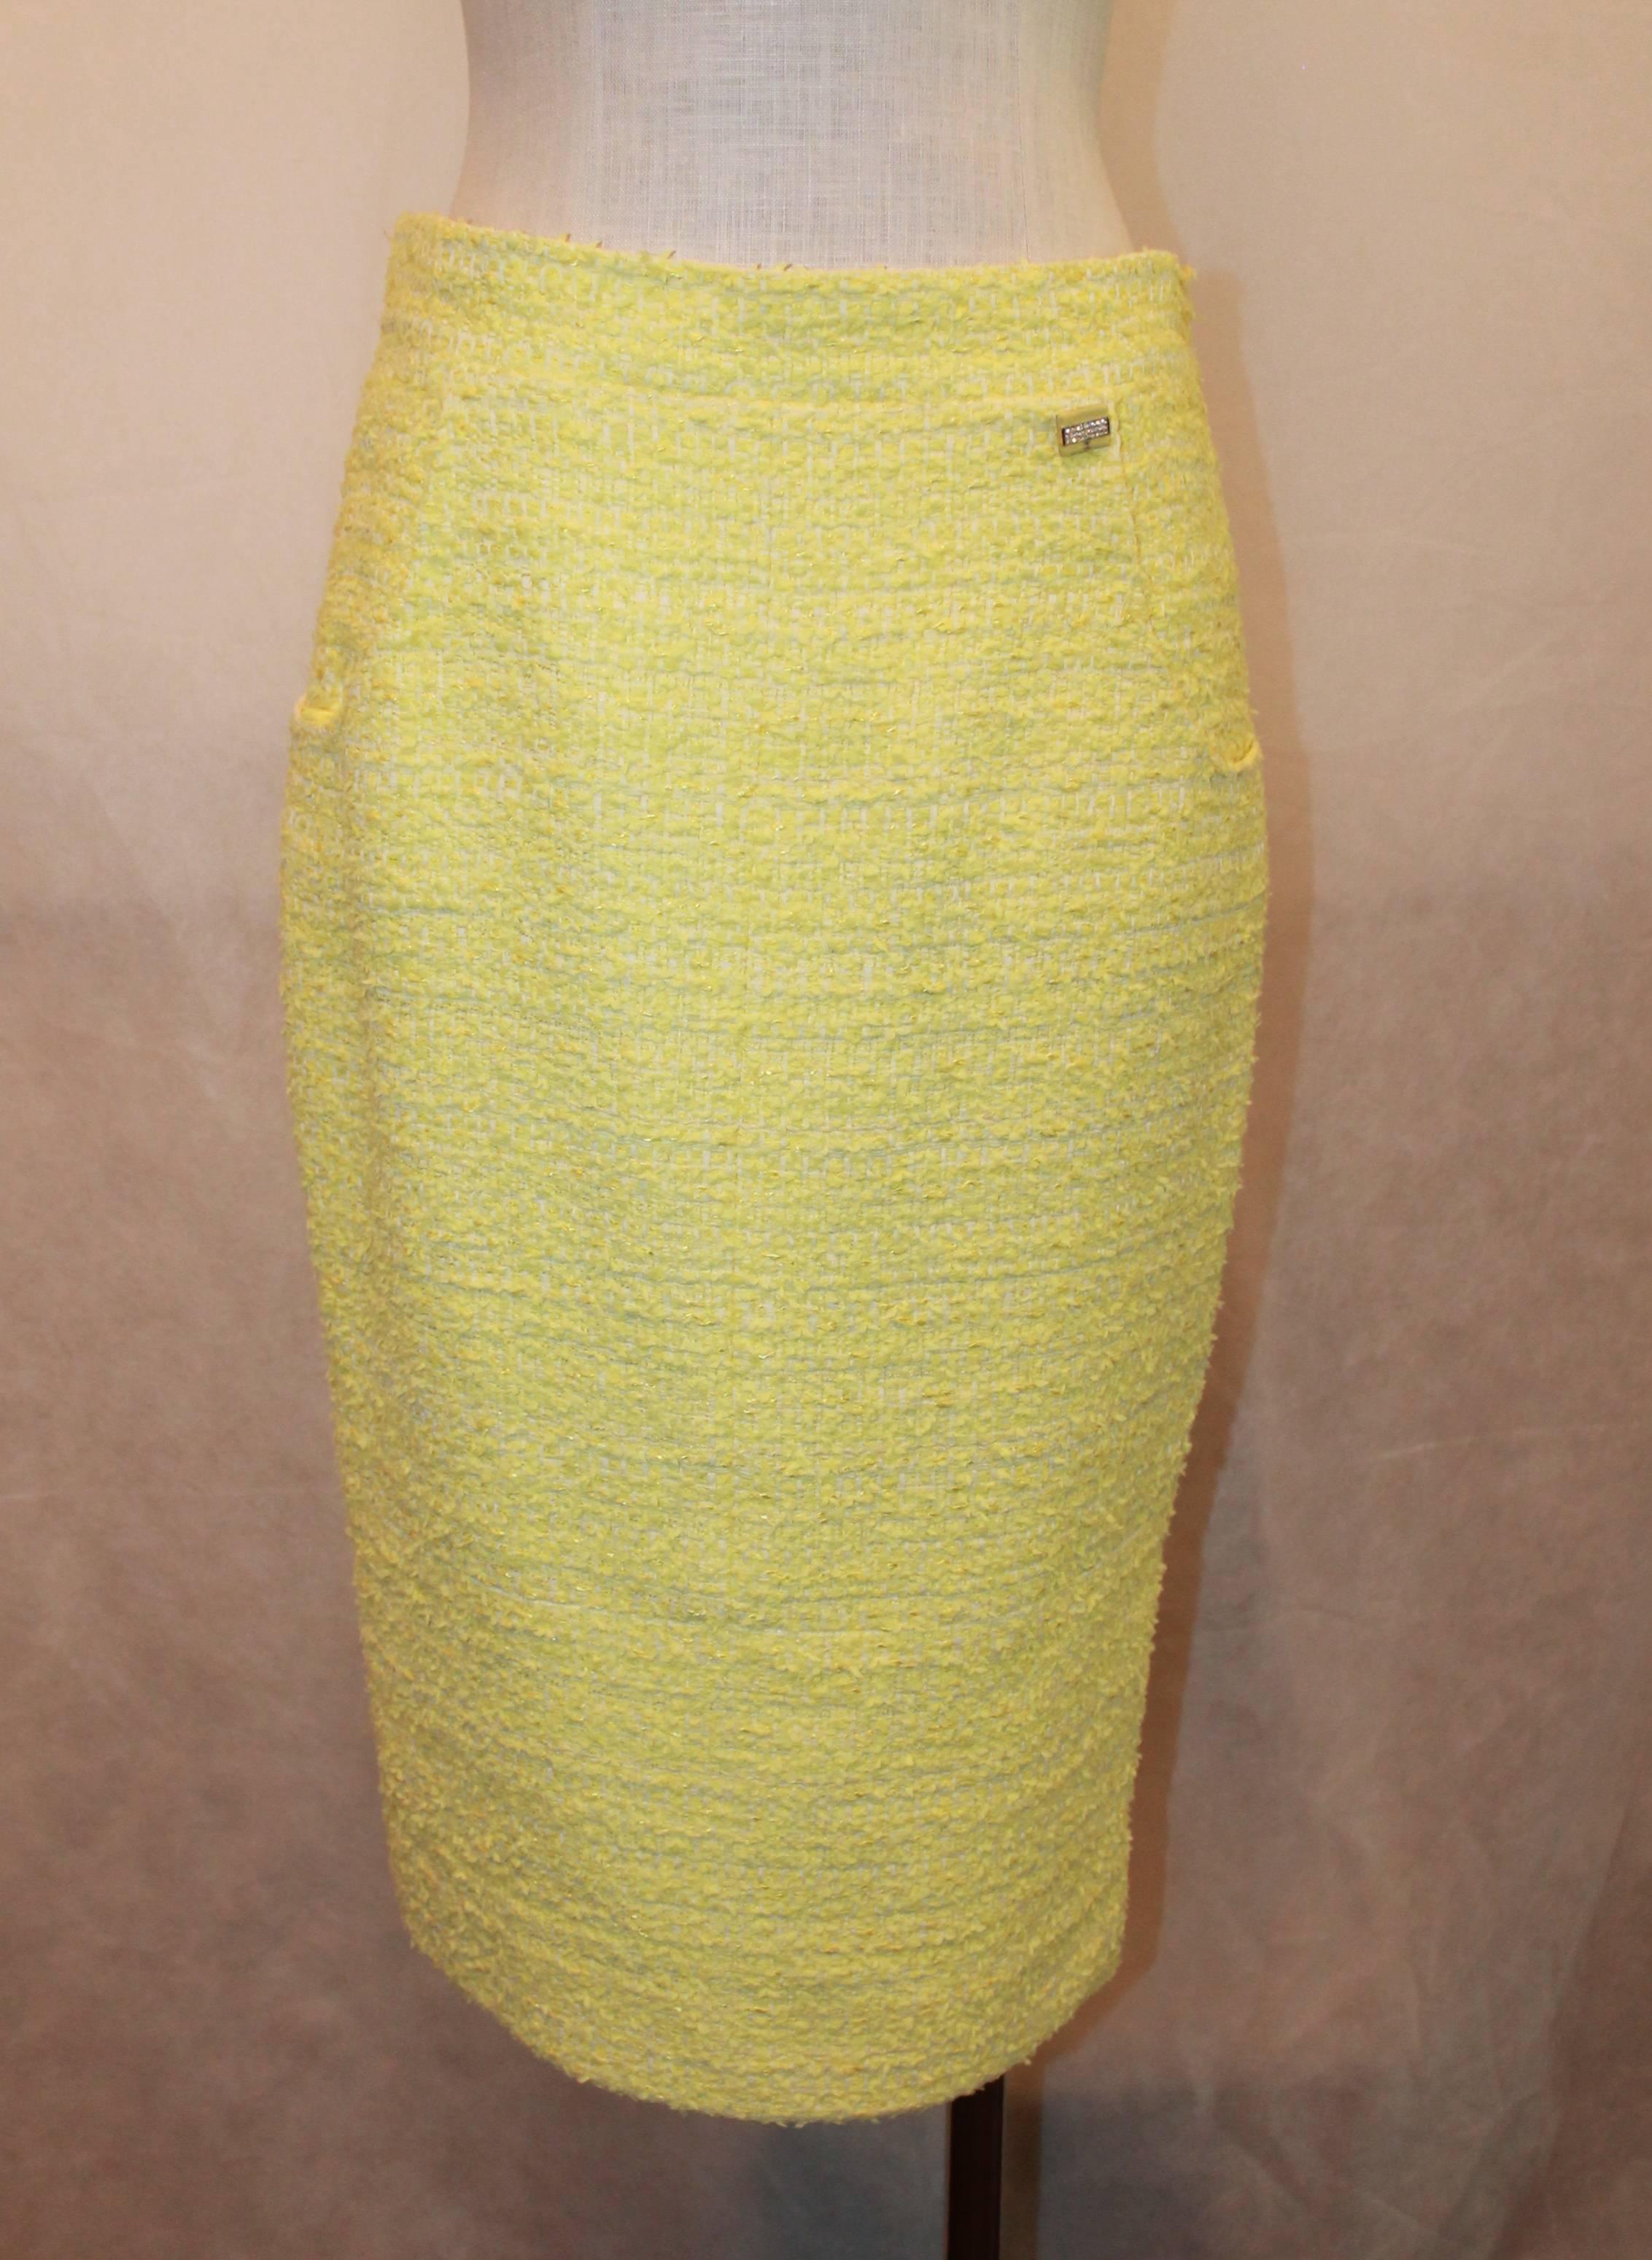 Chanel Yellow & Lime Tweed Skirt with 2 Pockets - 40.  This Chanel yellow tweed skirt has a middle seam, two front pockets, and a back center zipper.  it has one rectangle emblem with yellow enamel, white rhinestones, and the Chanel logo in